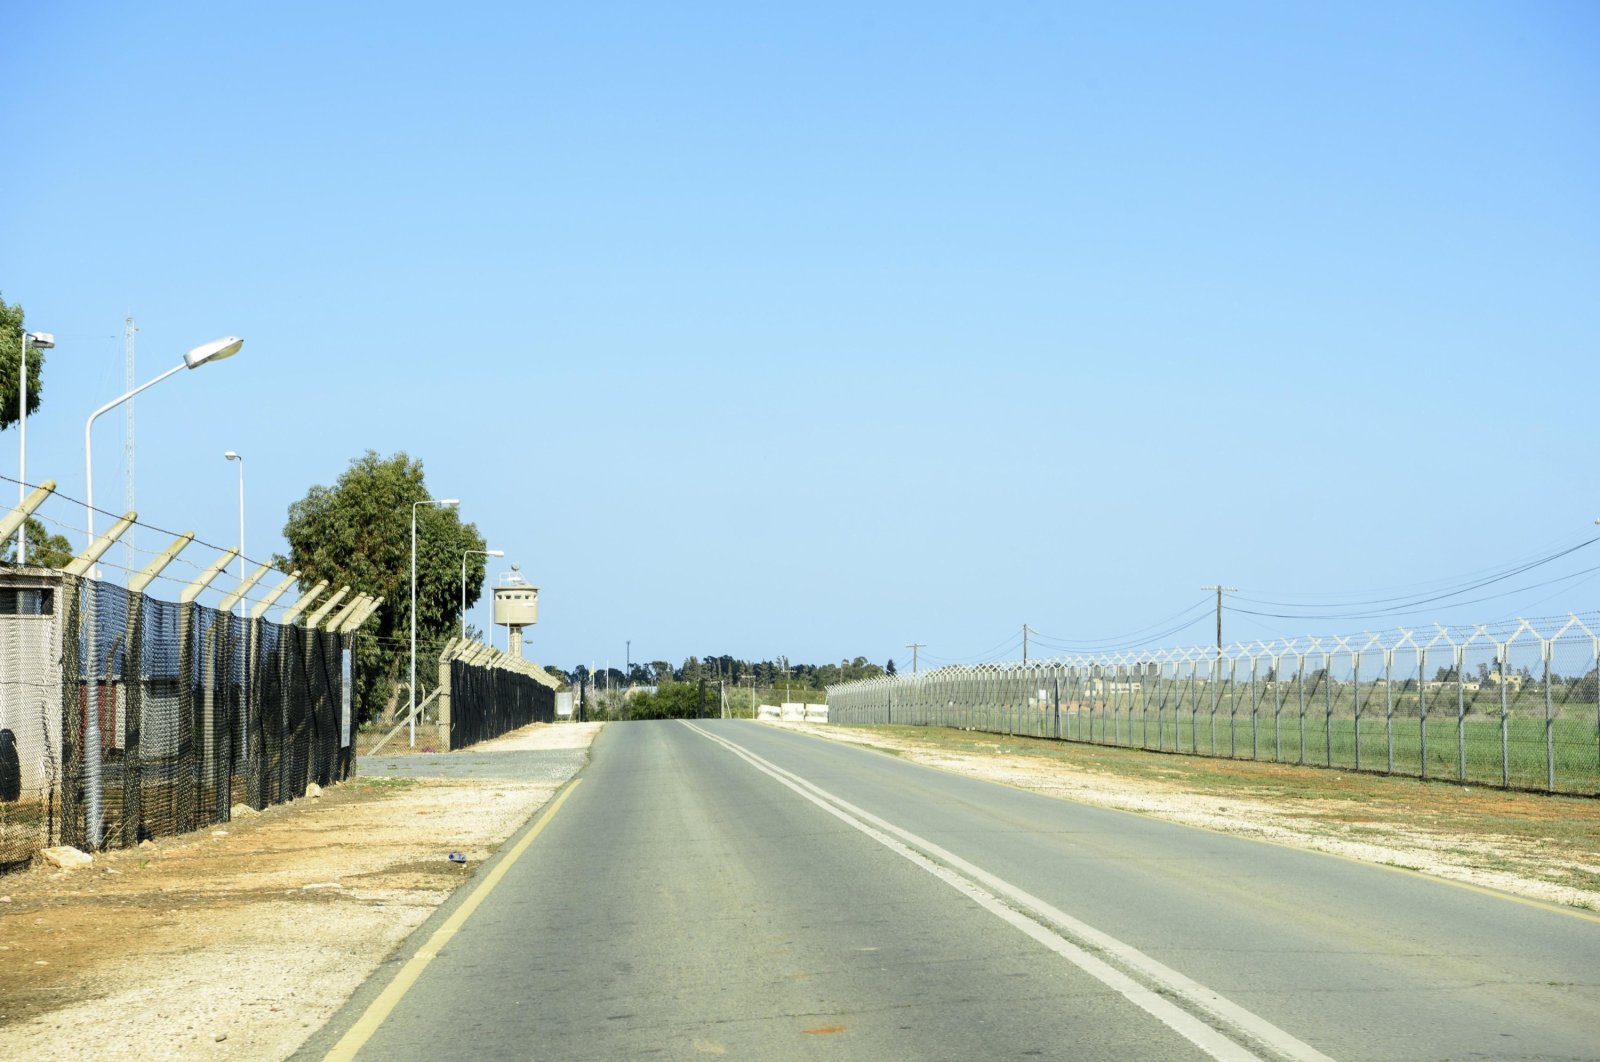 The U.N. buffer zone between the Greek Cypriot administration and the Turkish Republic of Northern Cyprus (TRNC), Nov. 5, 2021. (Getty Images)